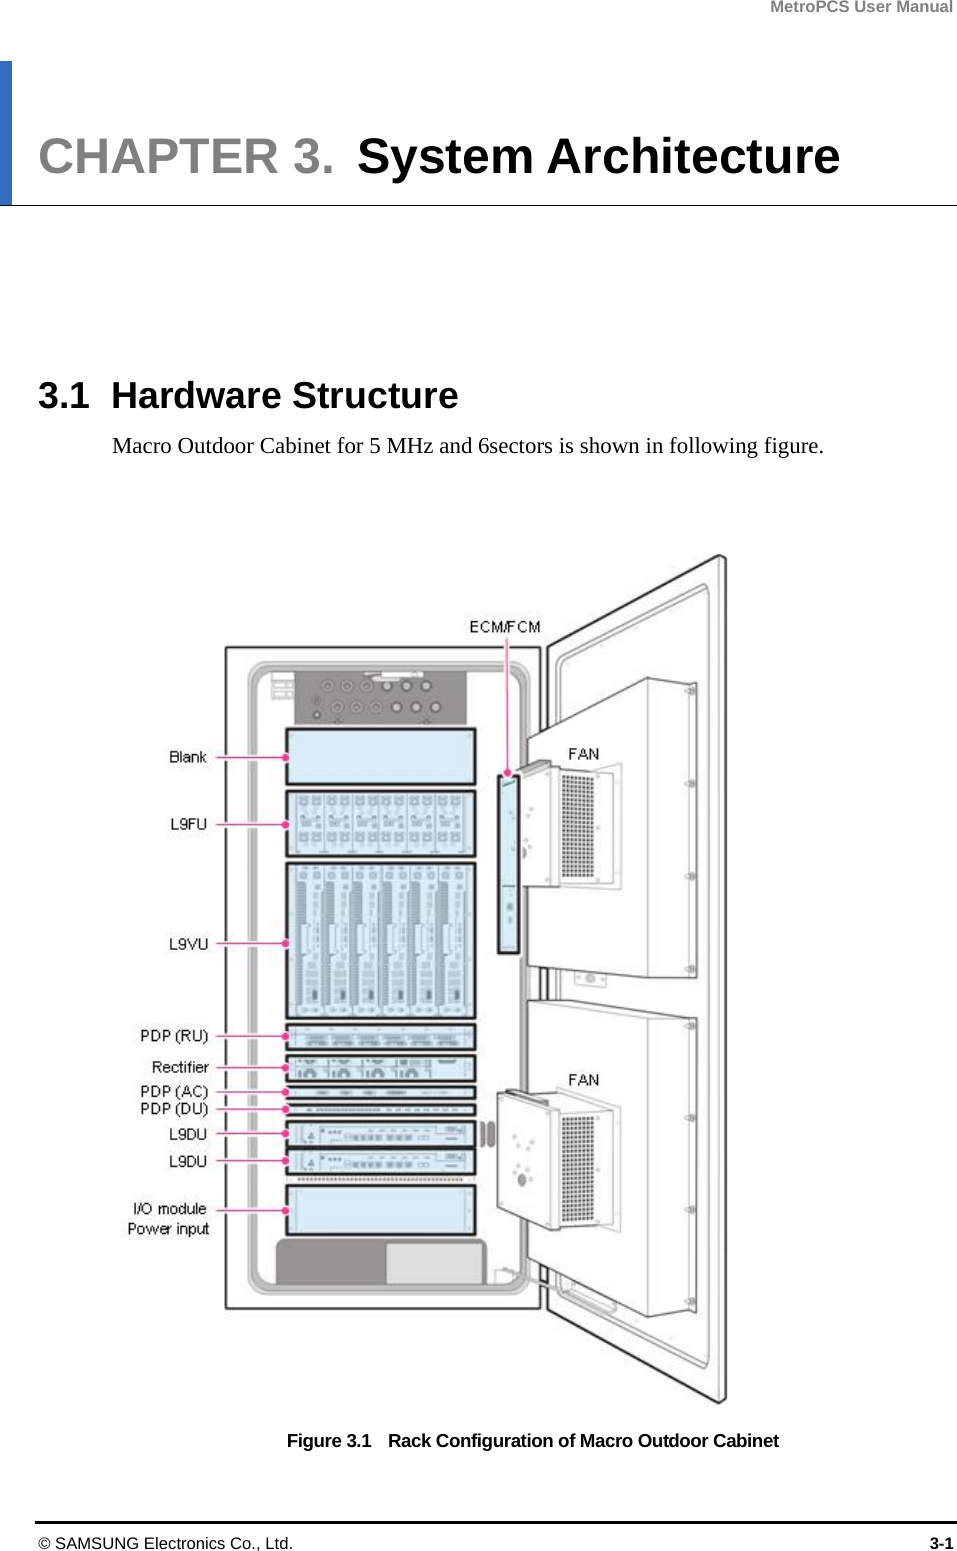 MetroPCS User Manual © SAMSUNG Electronics Co., Ltd.  3-1 CHAPTER 3.  System Architecture      3.1 Hardware Structure Macro Outdoor Cabinet for 5 MHz and 6sectors is shown in following figure.   Figure 3.1    Rack Configuration of Macro Outdoor Cabinet 